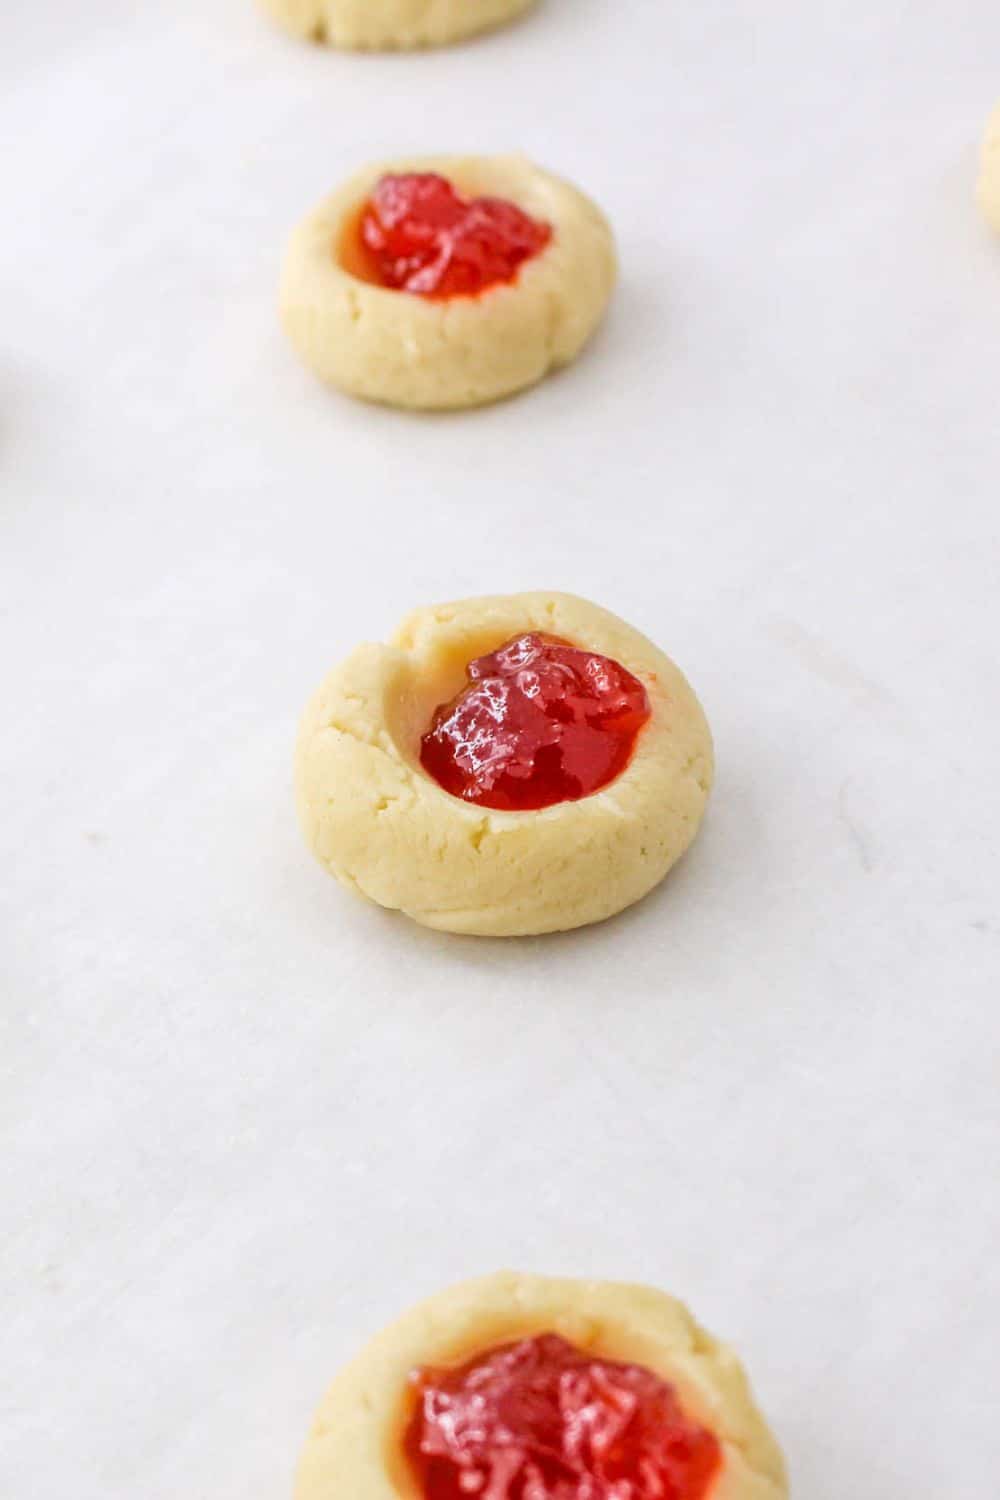 thumbprint cookies on a cookie sheet with a fruit jam in the center of the raw cookie dough